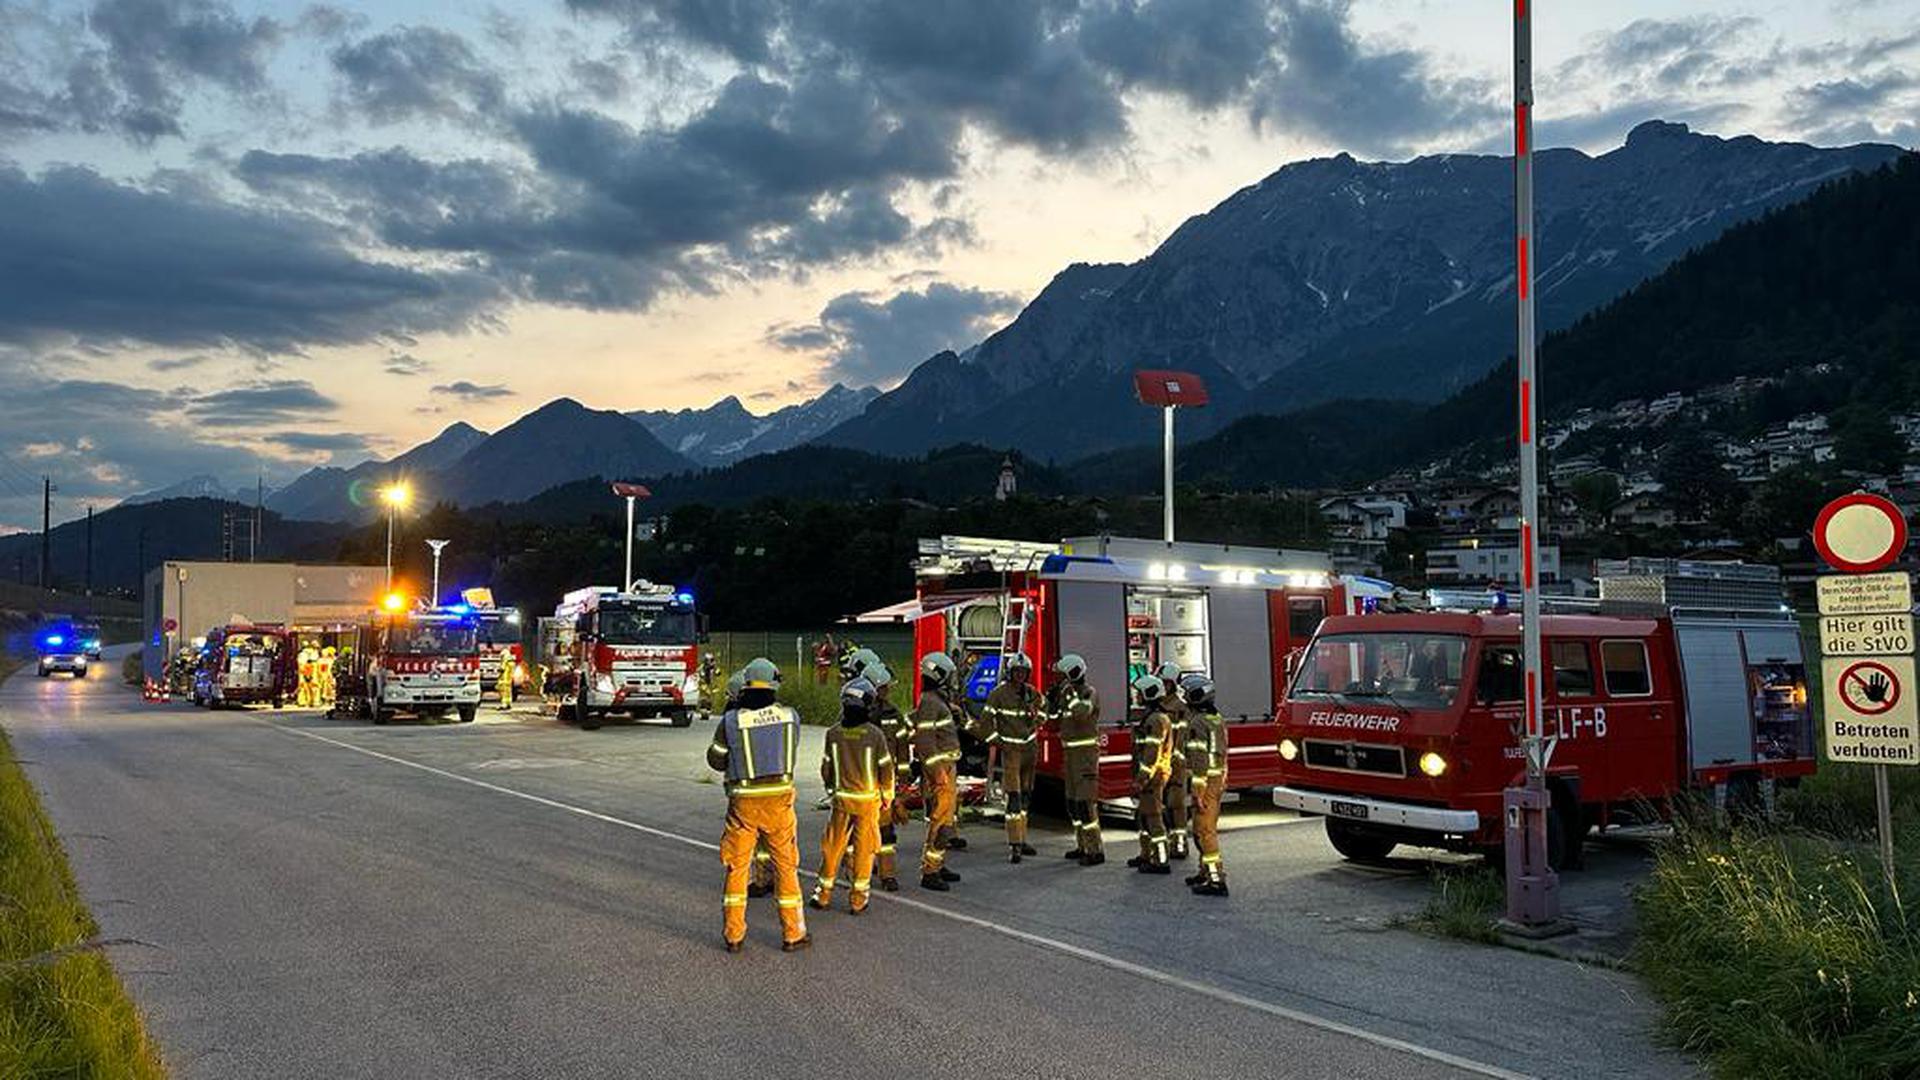 Members of the fire brigade are seen near the Terfener tunnel in Fritzens, western Austria, where a fire broke out for unknown reasons on June 7, 2023. A Nightjet train with about 200 passengers on board was in the tunnel at the time the fire broke out. No casualties were reported so far. (Photo by ZOOM.TIROL / APA / AFP) / Austria OUT